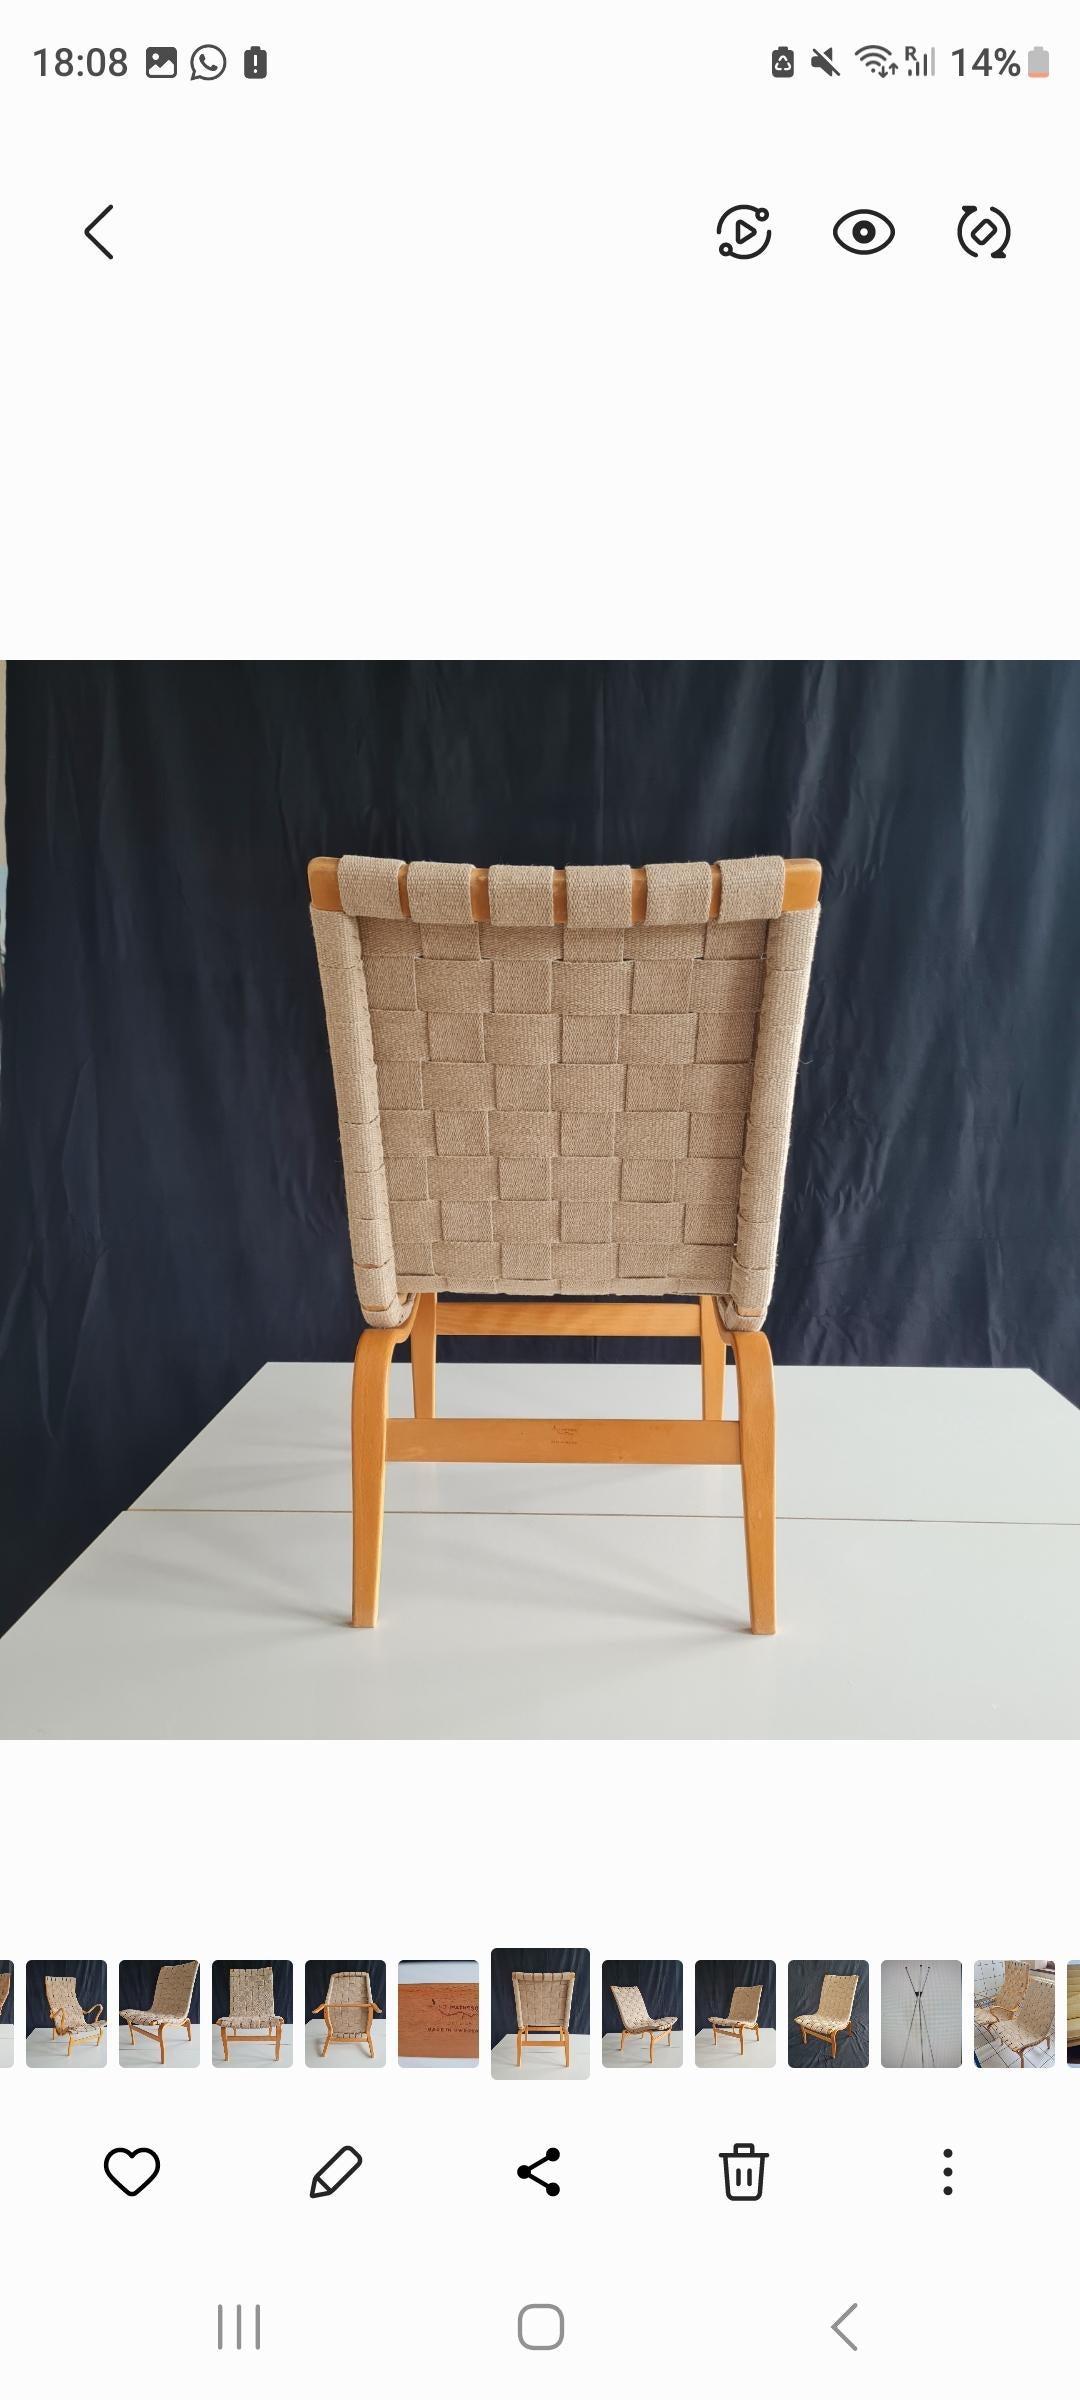 Bruno Mathsson reading chair, originally designed in 1934 in laminated beech bent wood with linen webbing. This later version has original webbing and is in worn original condition. Wood reading tray is missing but hardware is attached to arm rest.